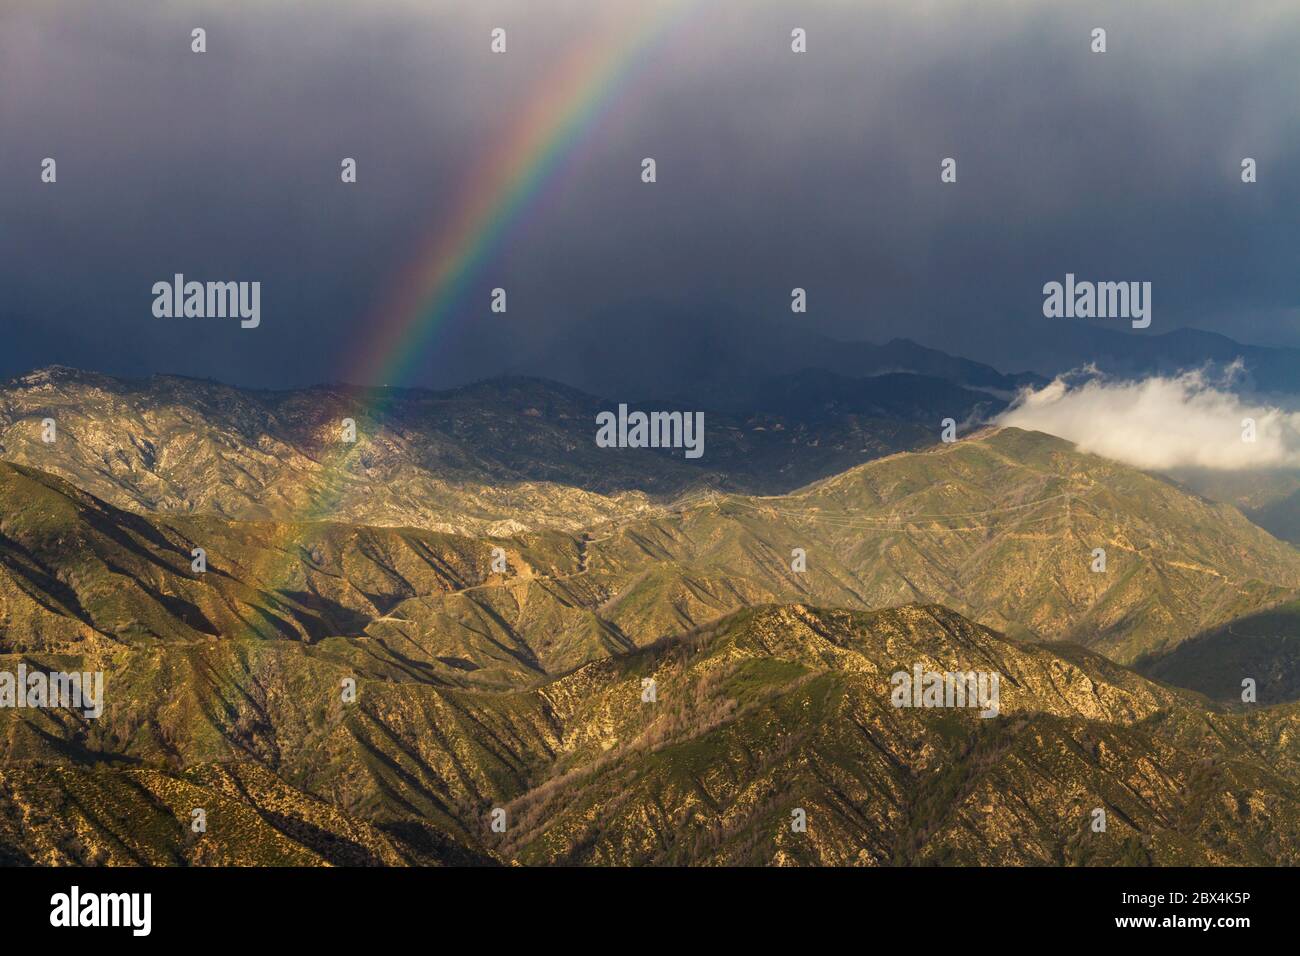 A rainbow cuts through the clouds in the San Gabriel Mountains of Southern California Stock Photo